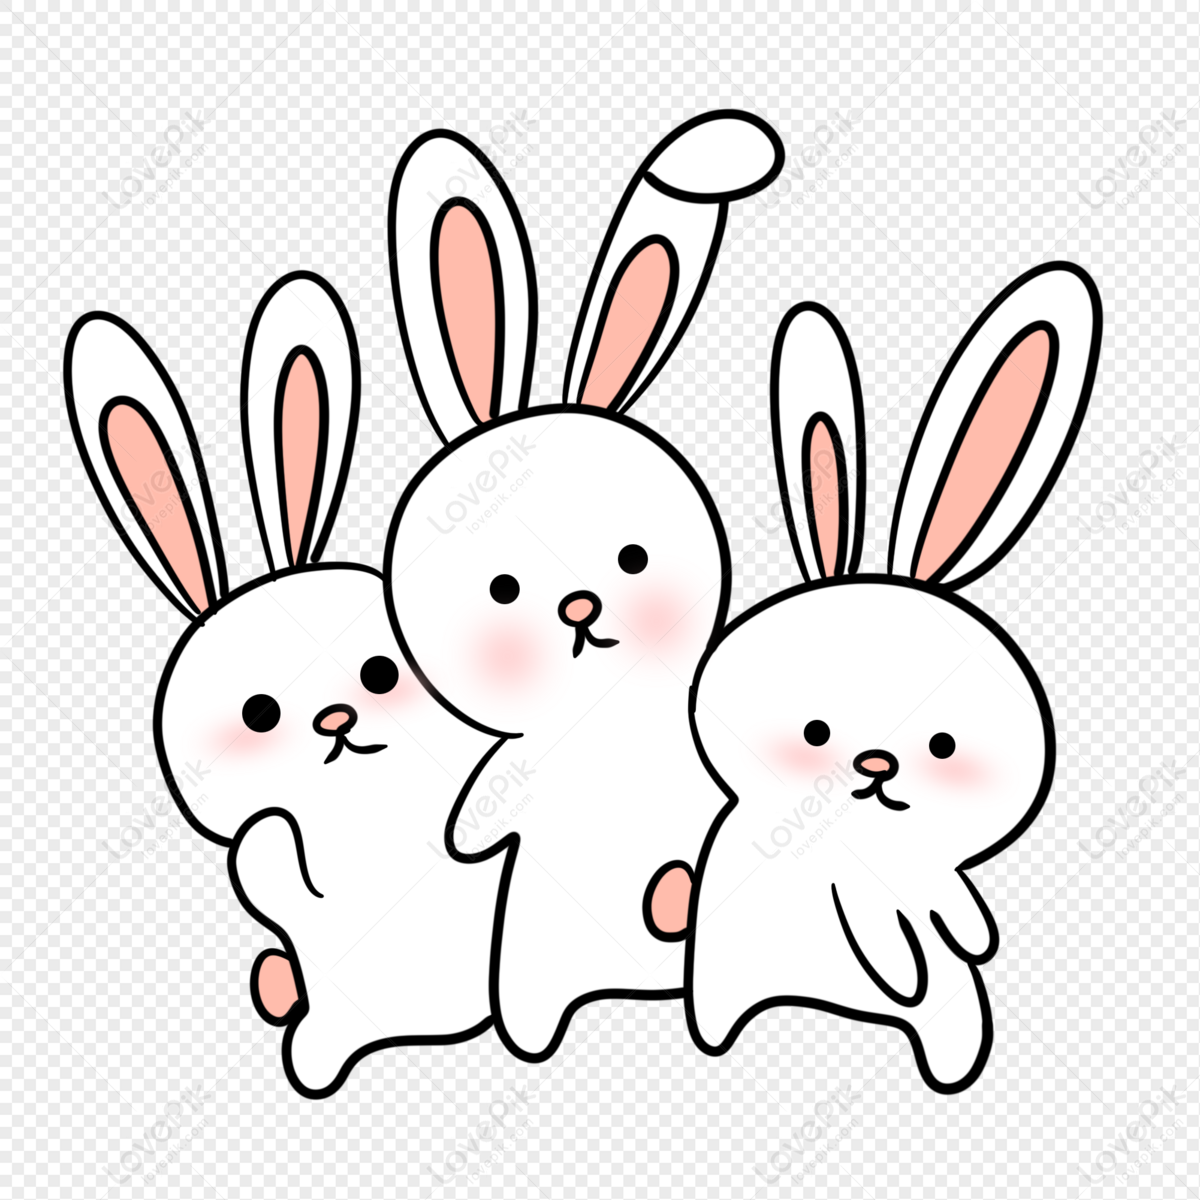 Cartoon Cute Rabbit Expression Pack PNG Image And Clipart Image For Free  Download - Lovepik | 401359858